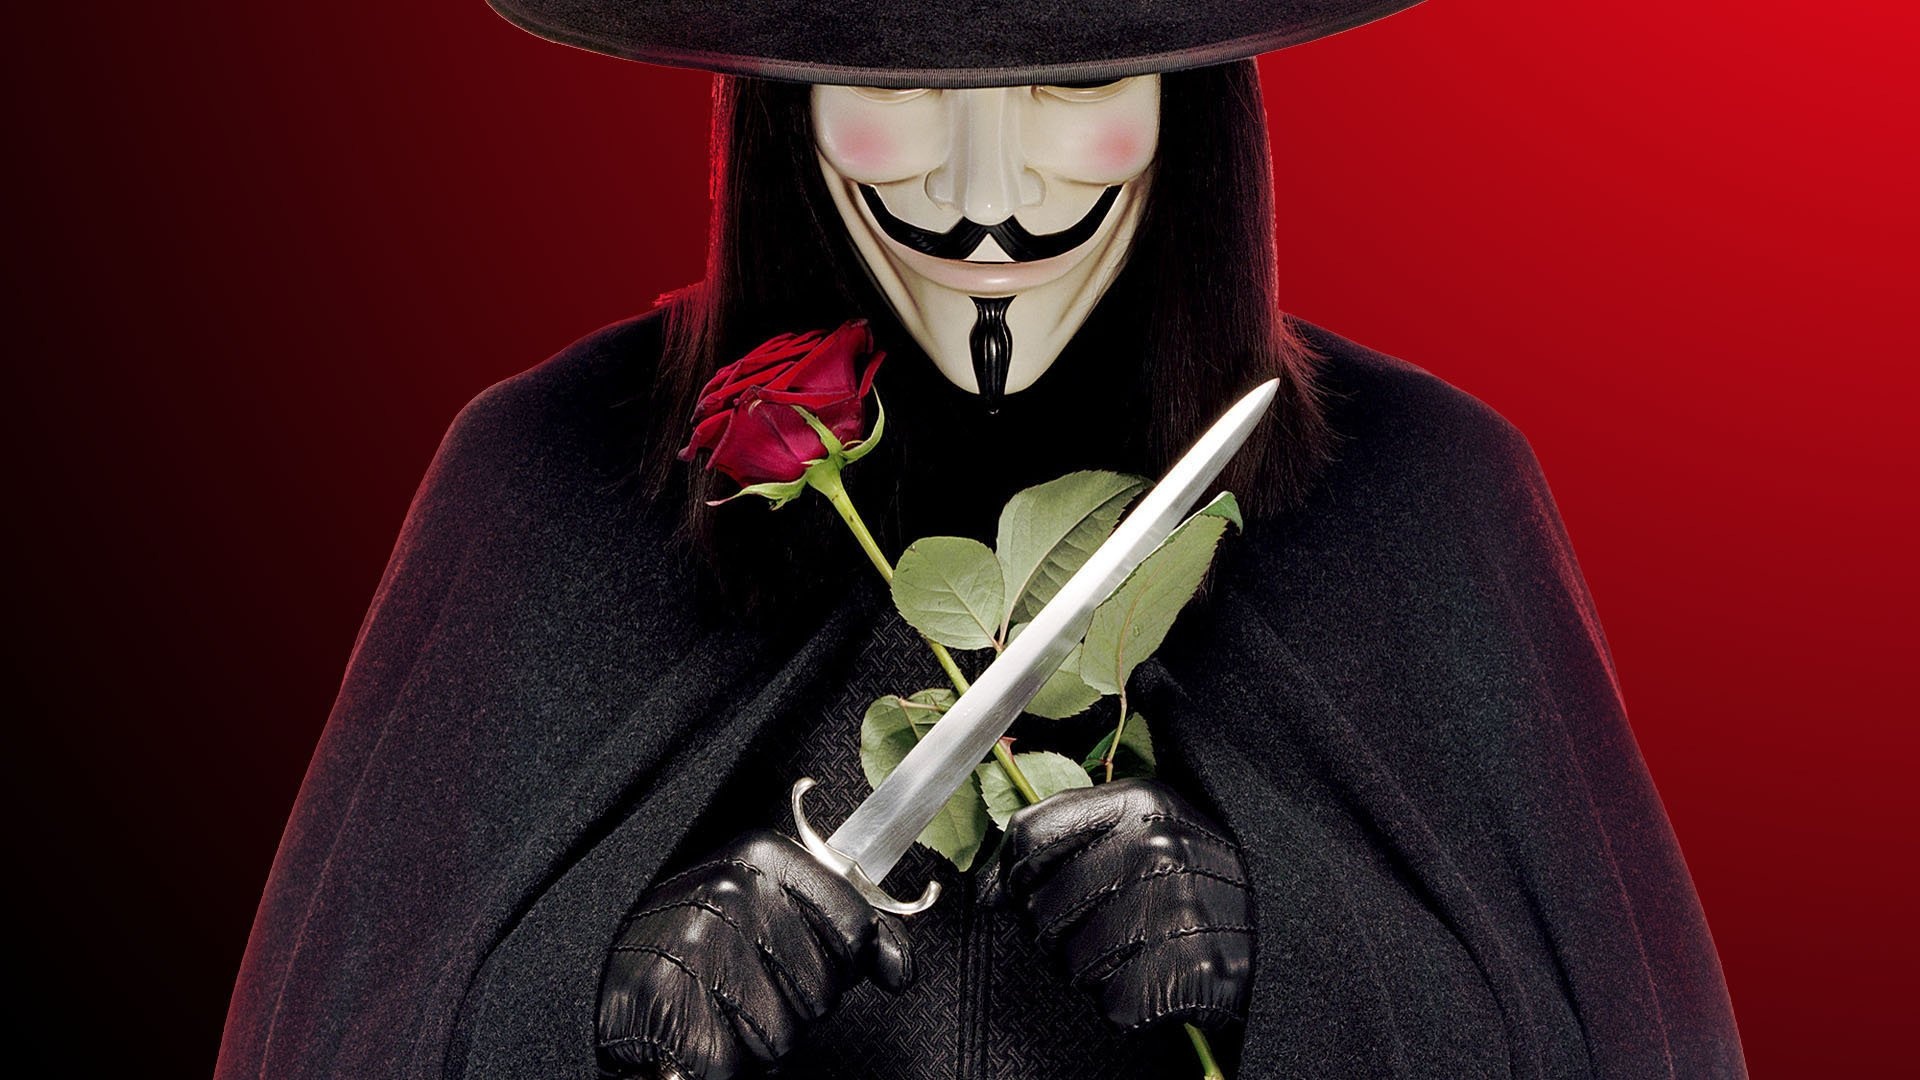 V for Vendetta: Masked phantom, Lilly and Lana Wachowski and Joel Silver. 1920x1080 Full HD Background.